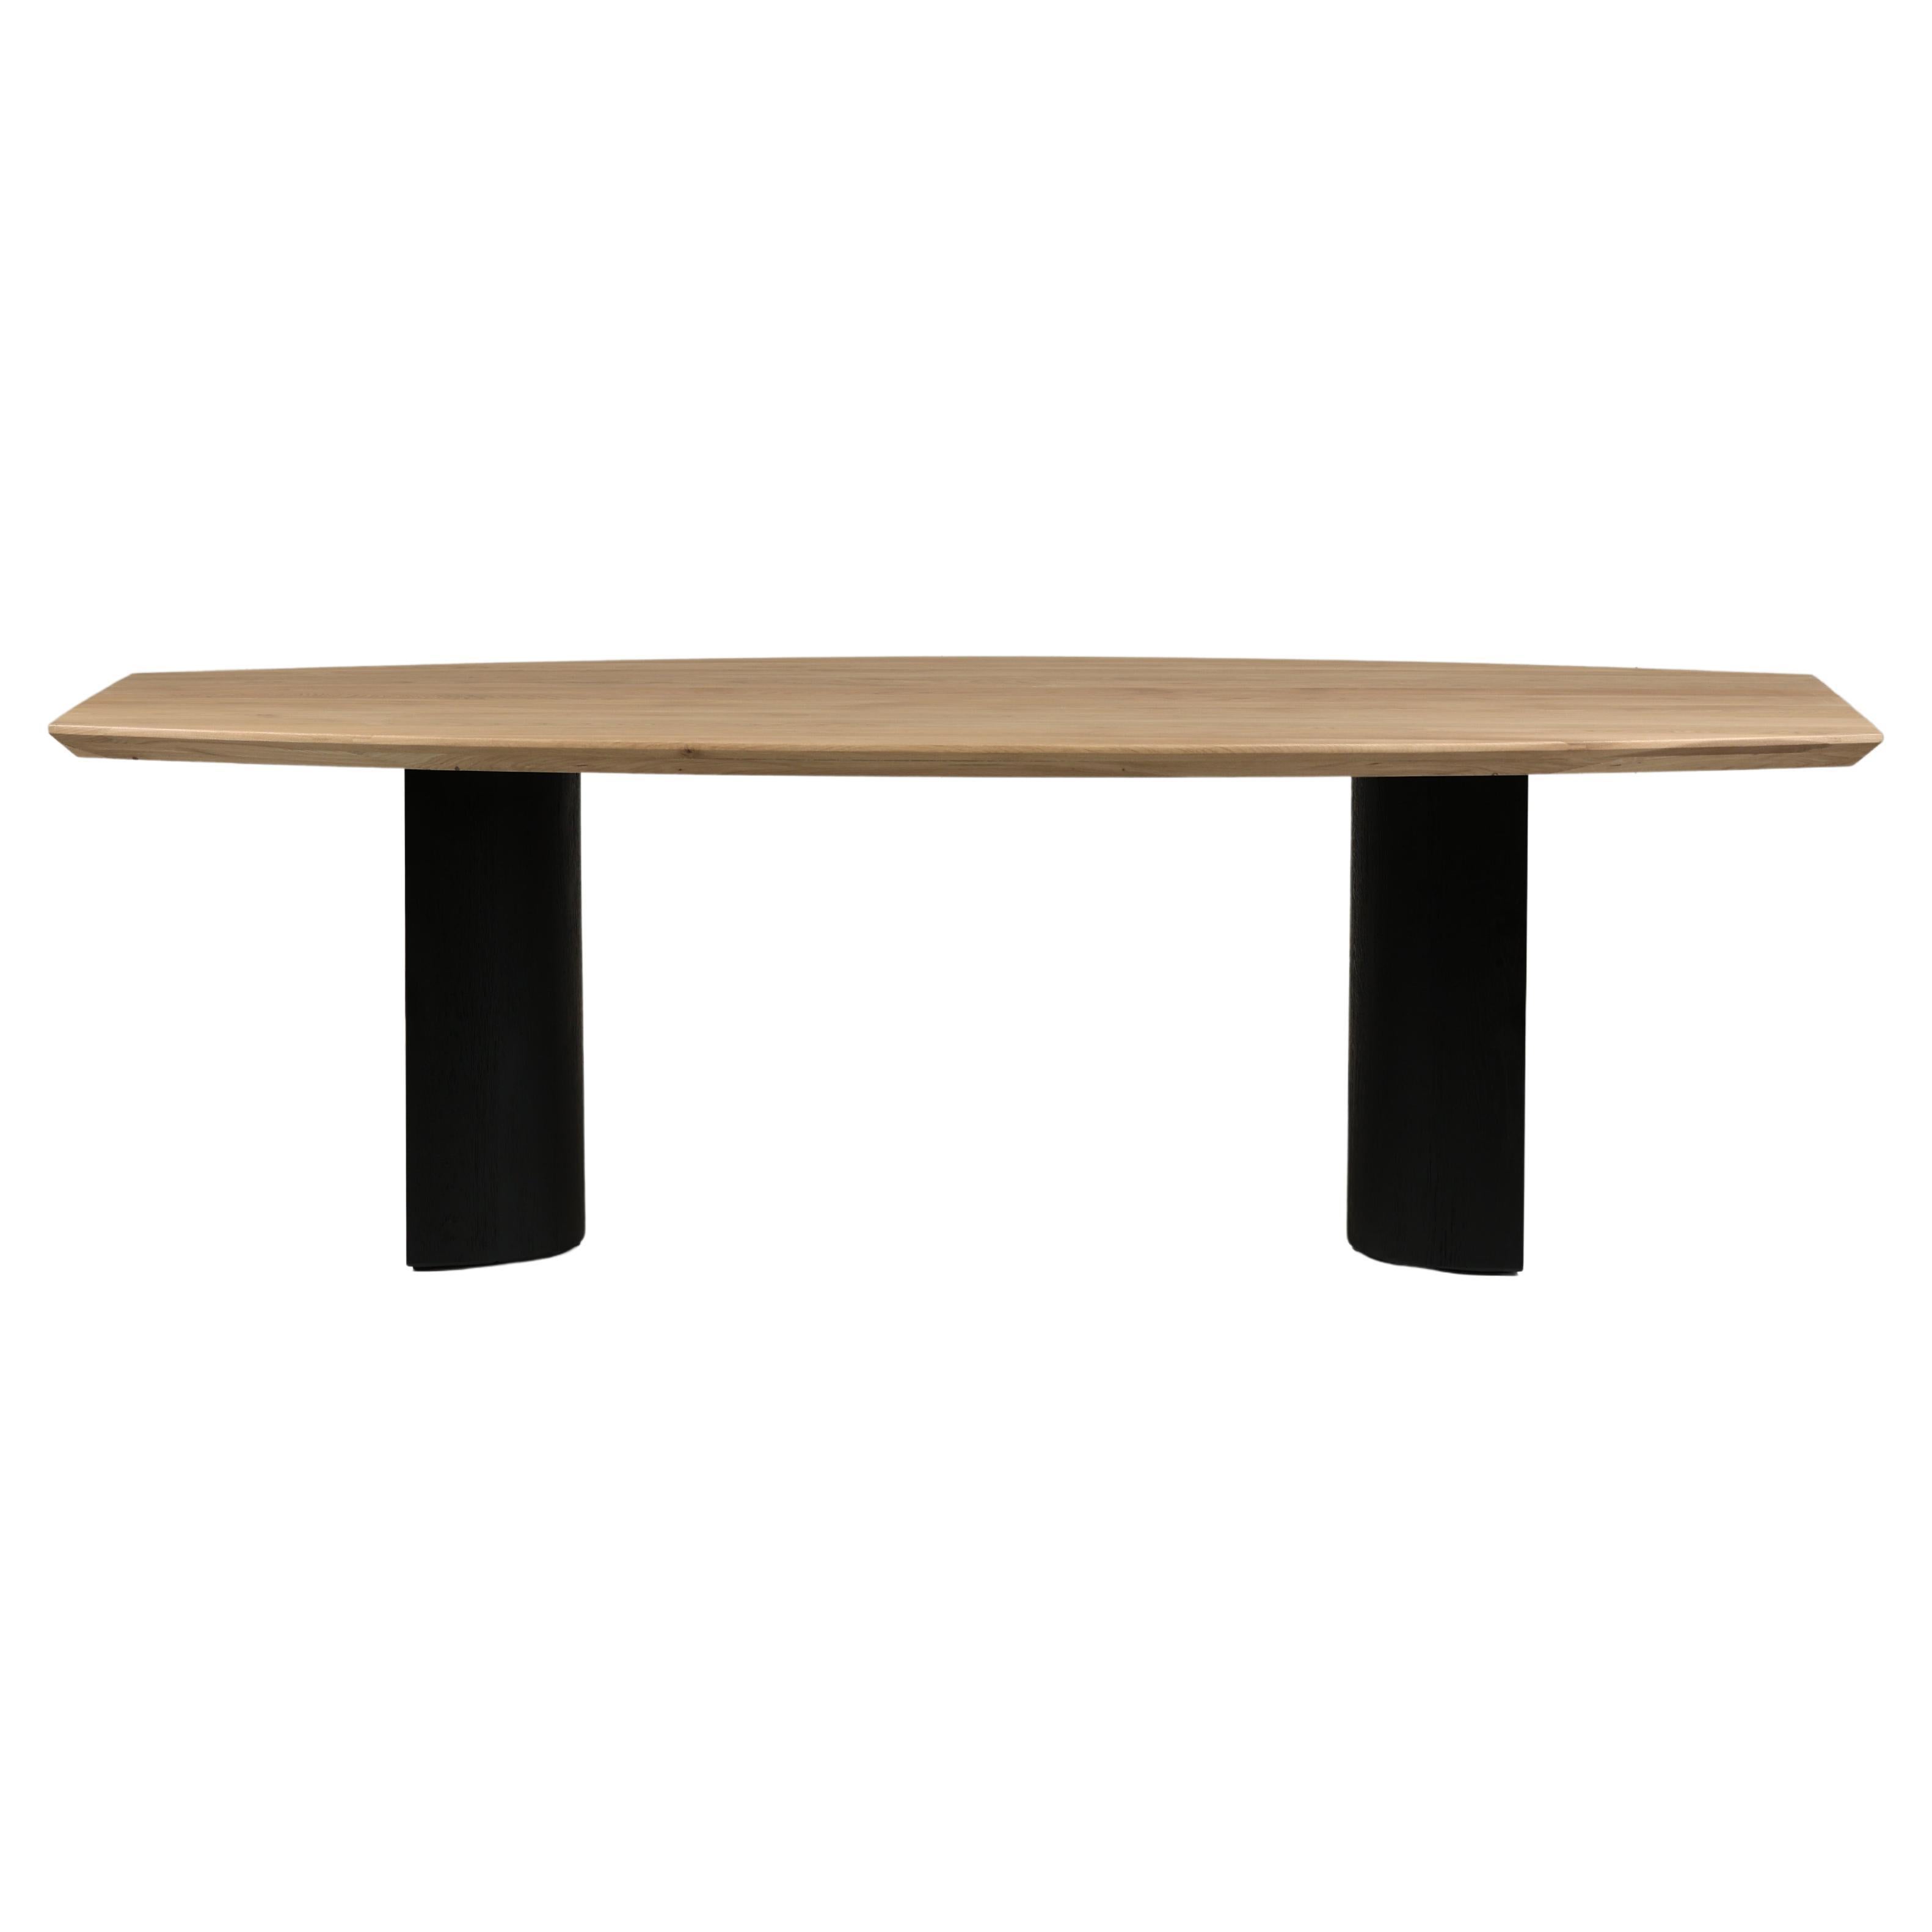 Wyda Conference Table from The Oak Saga collection by Arbore